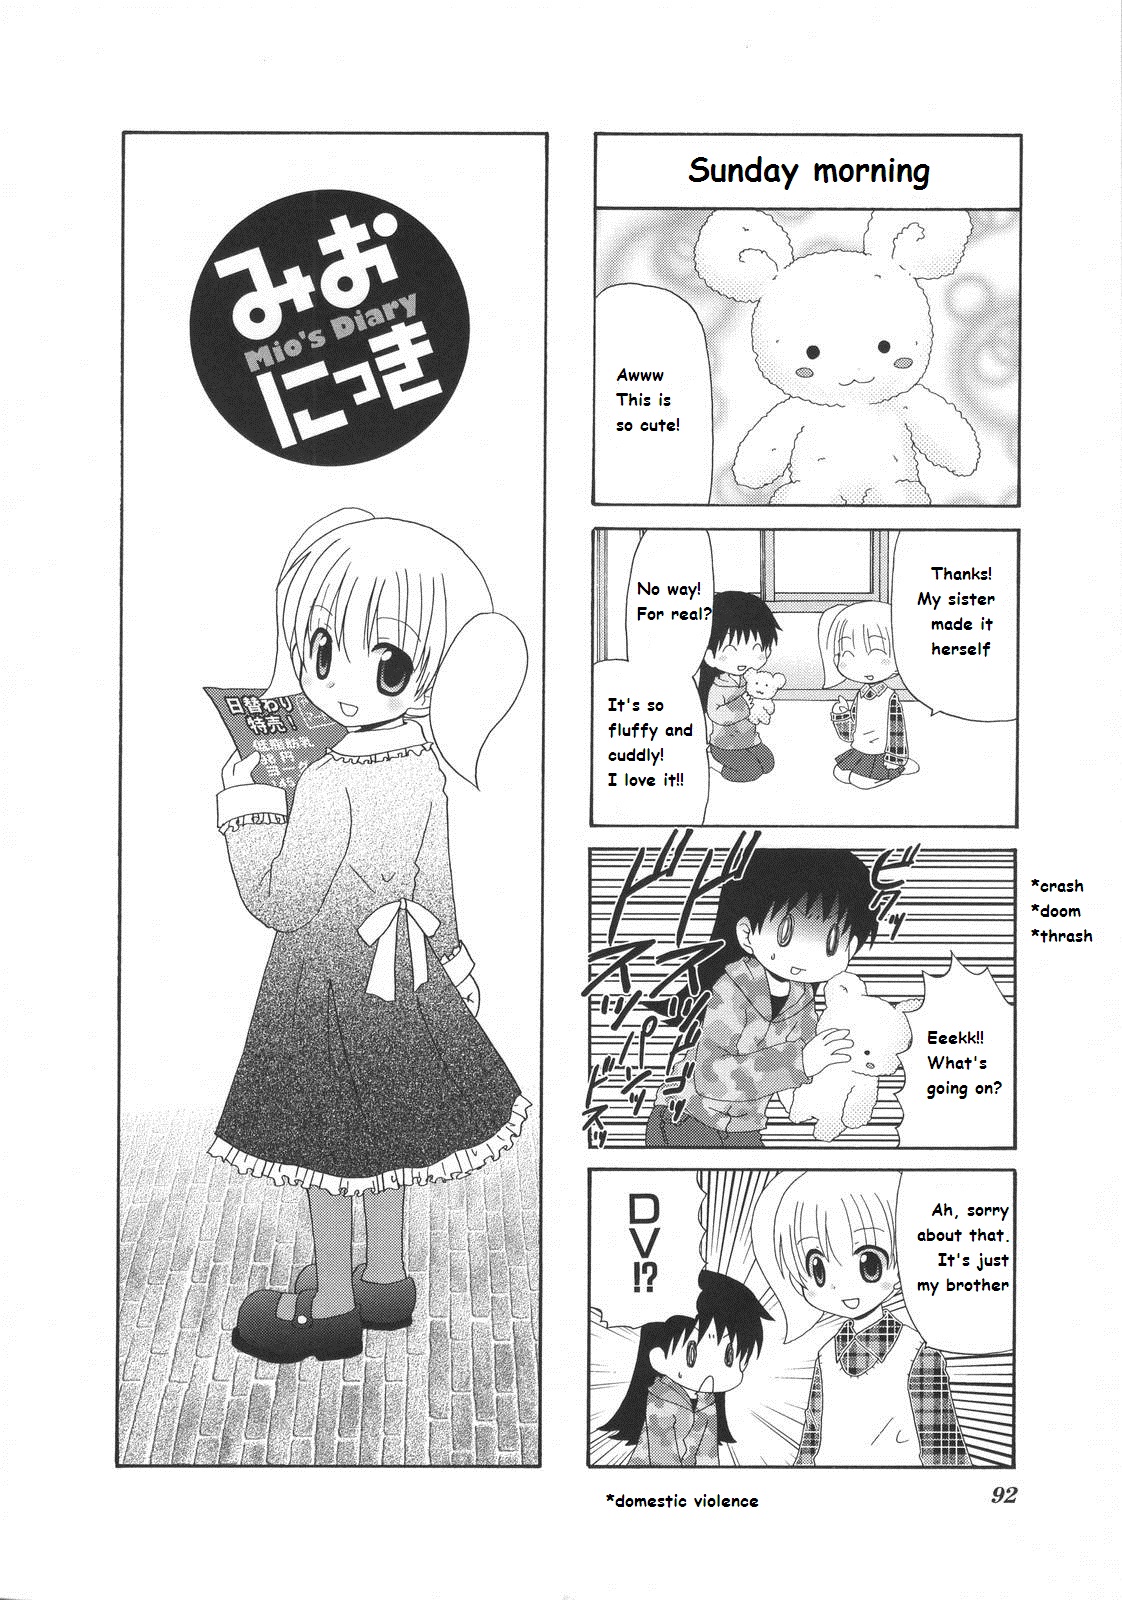 Mio's Diary Chapter 22 #1